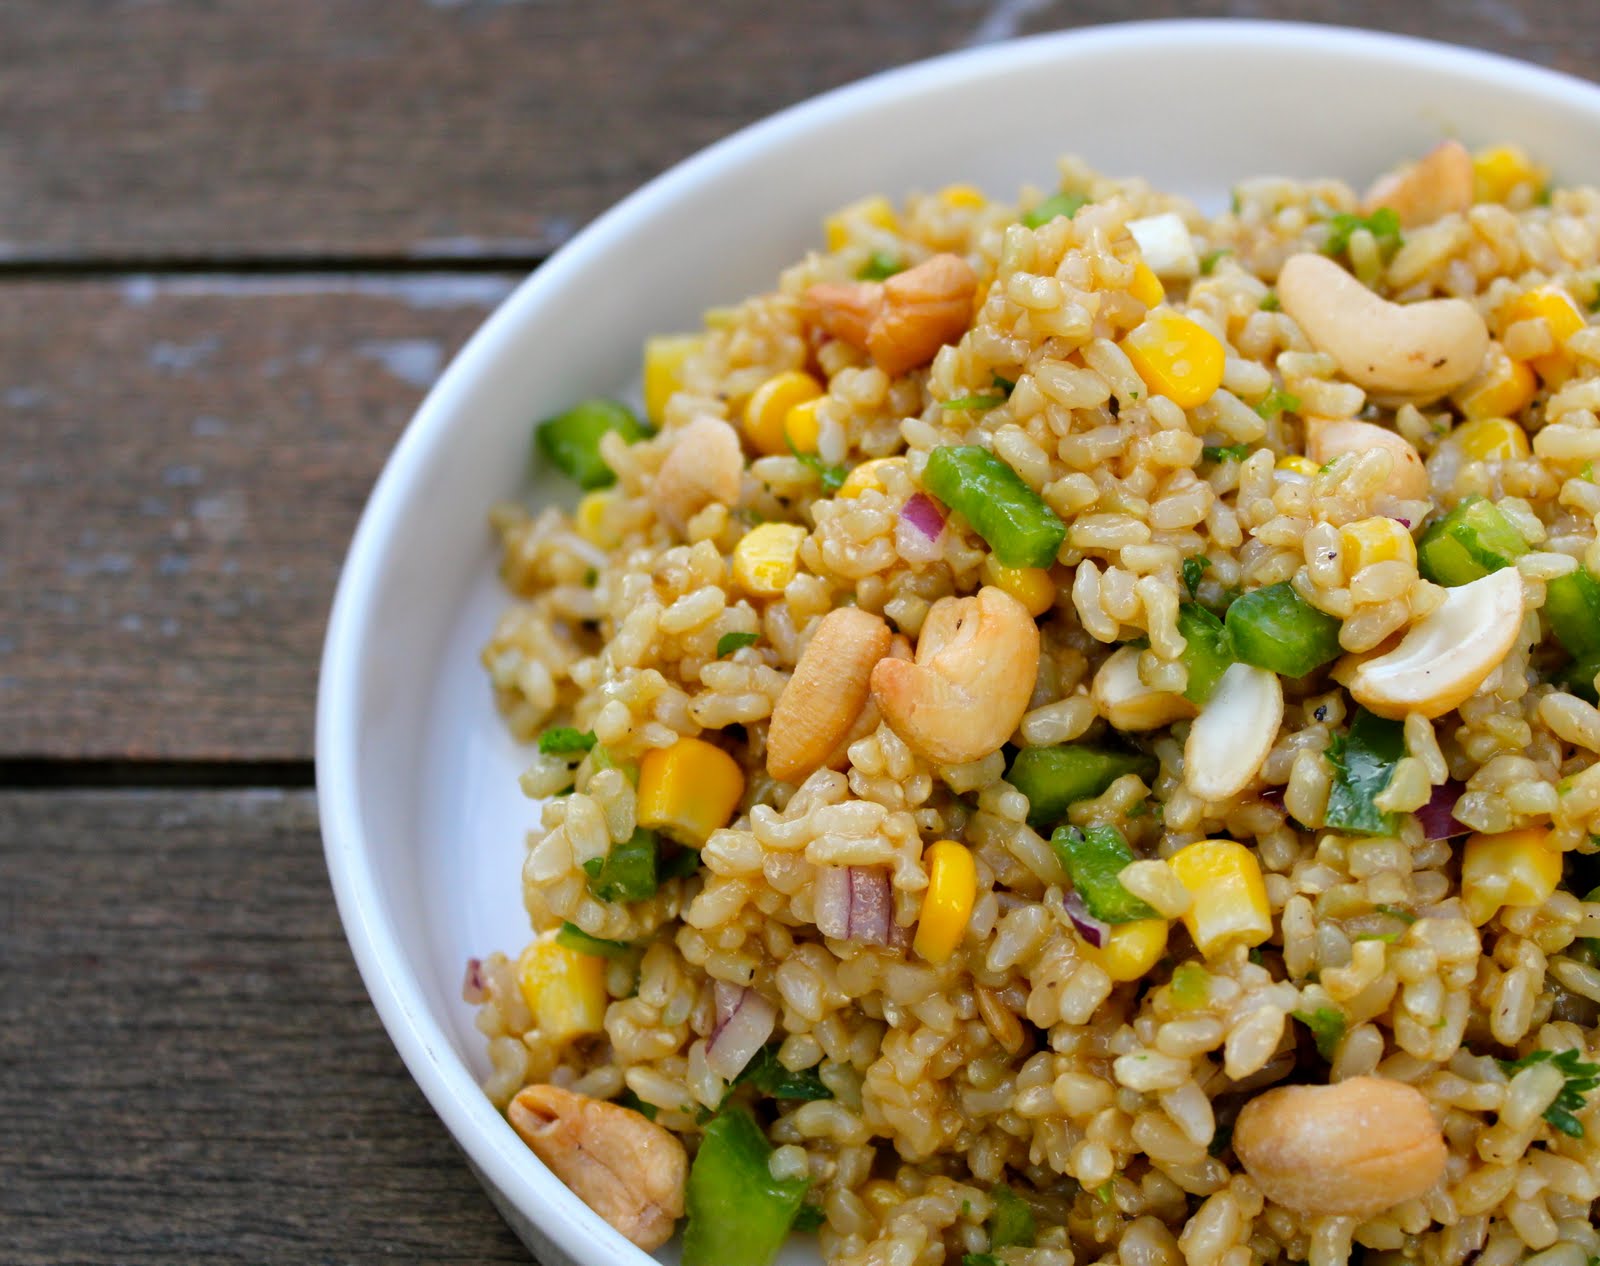 how to make quinoa and brown rice taste good